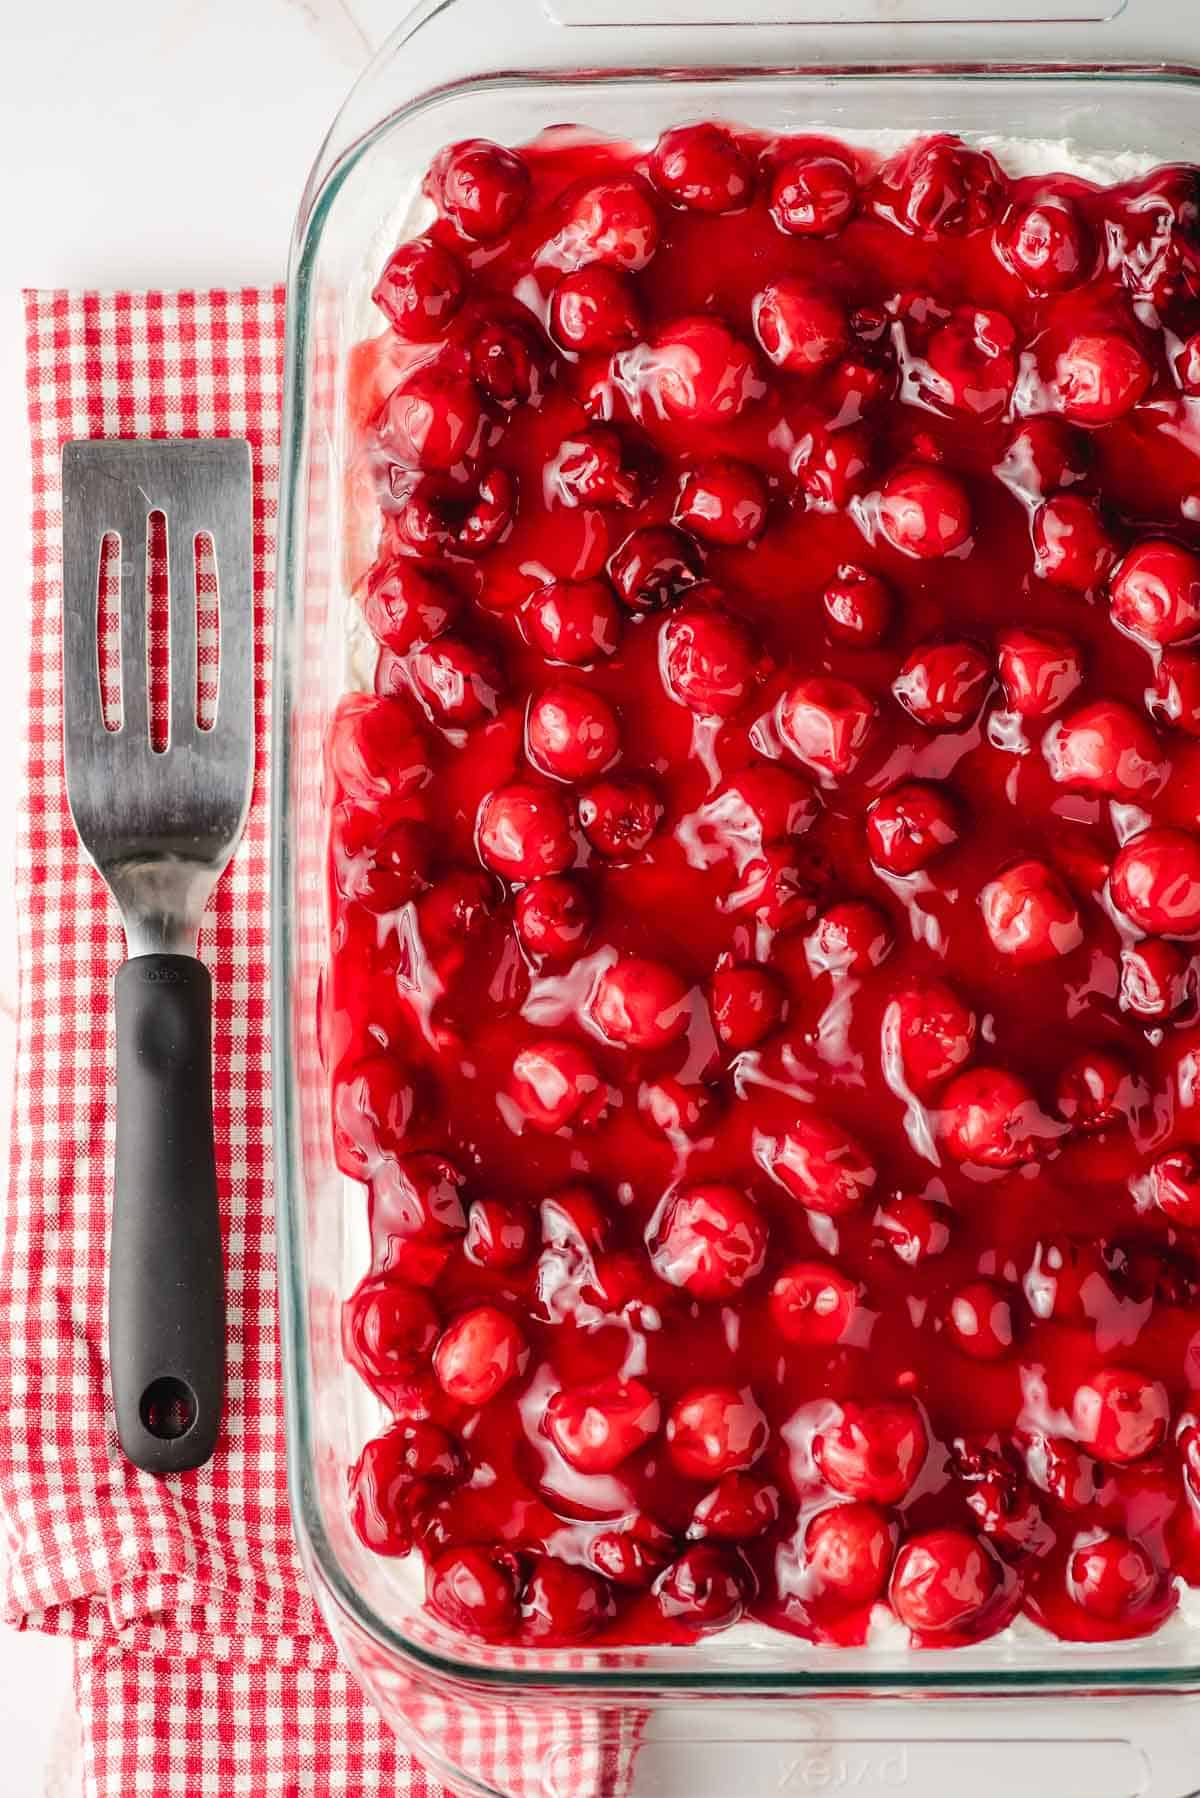 Cherry delight in a glass dish with a red checked tea towel and metal spatula beside it.